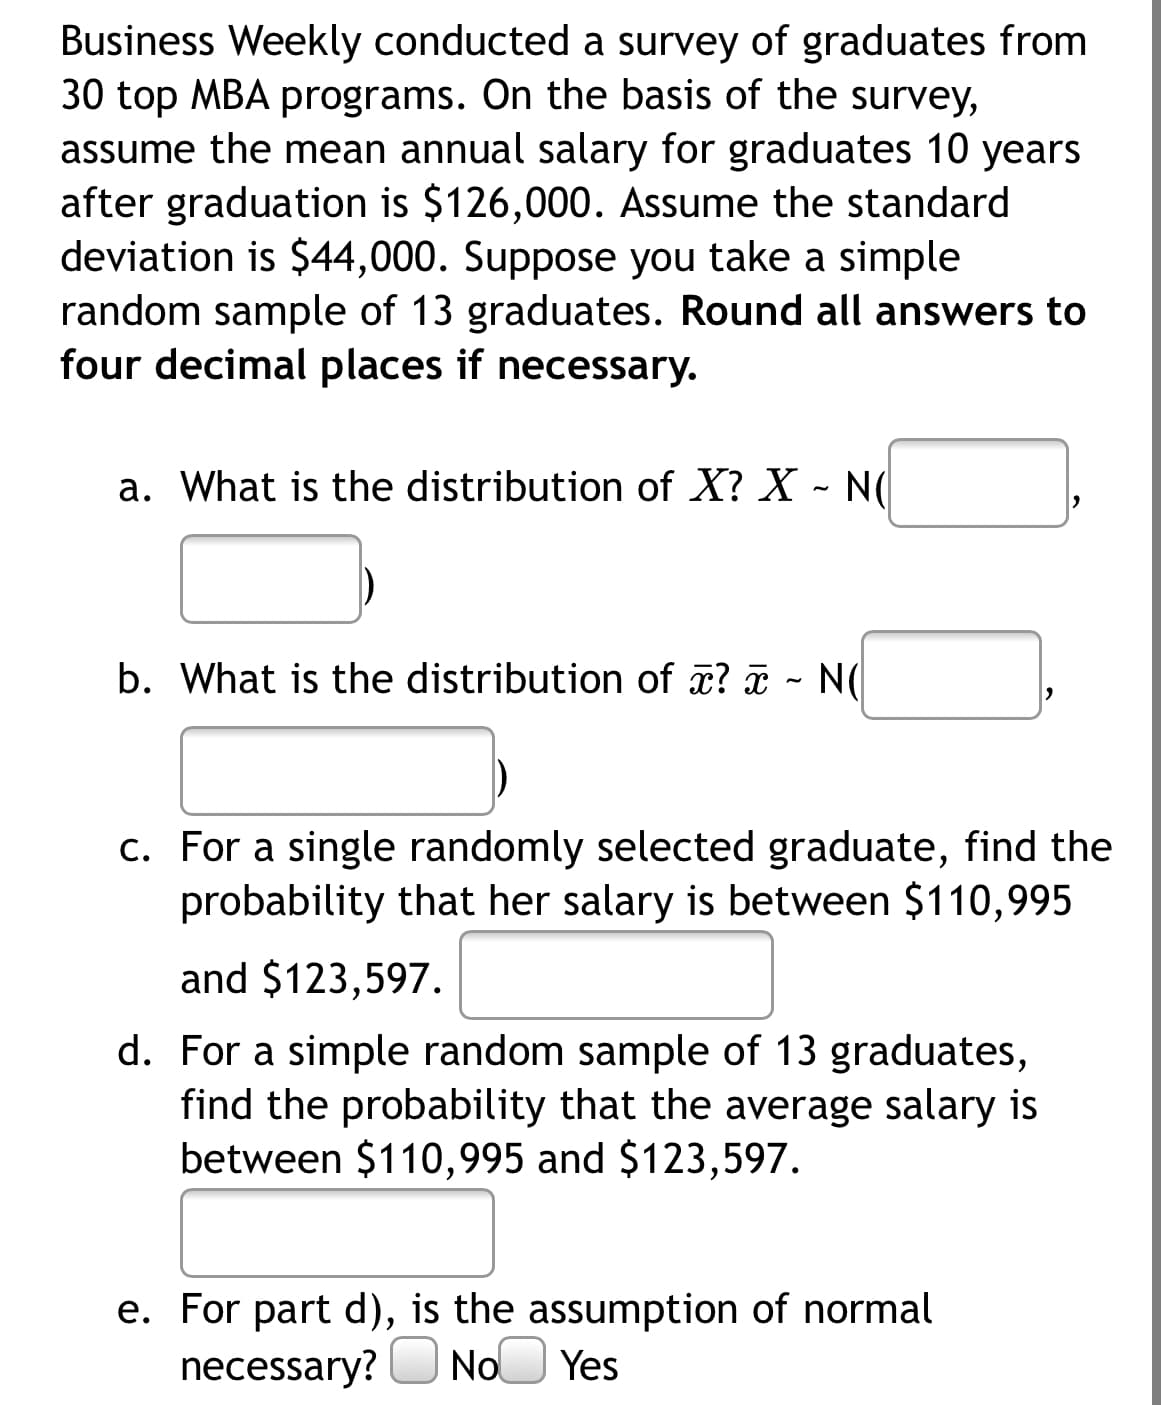 Business Weekly conducted a survey of graduates from
30 top MBA programs. On the basis of the survey,
assume the mean annual salary for graduates 10 years
after graduation is $126,000. Assume the standard
deviation is $44,000. Suppose you take a simple
random sample of 13 graduates. Round all answers to
four decimal places if necessary.
a. What is the distribution of X? X - N(d
b. What is the distribution of x? - N(
c. For a single randomly selected graduate, find the
probability that her salary is between $110,995
and $123,597.
d. For a simple random sample of 13 graduates,
find the probability that the average salary is
between $110,995 and $123,597.
e. For part d), is the assumption of normal
necessary? O No Yes
